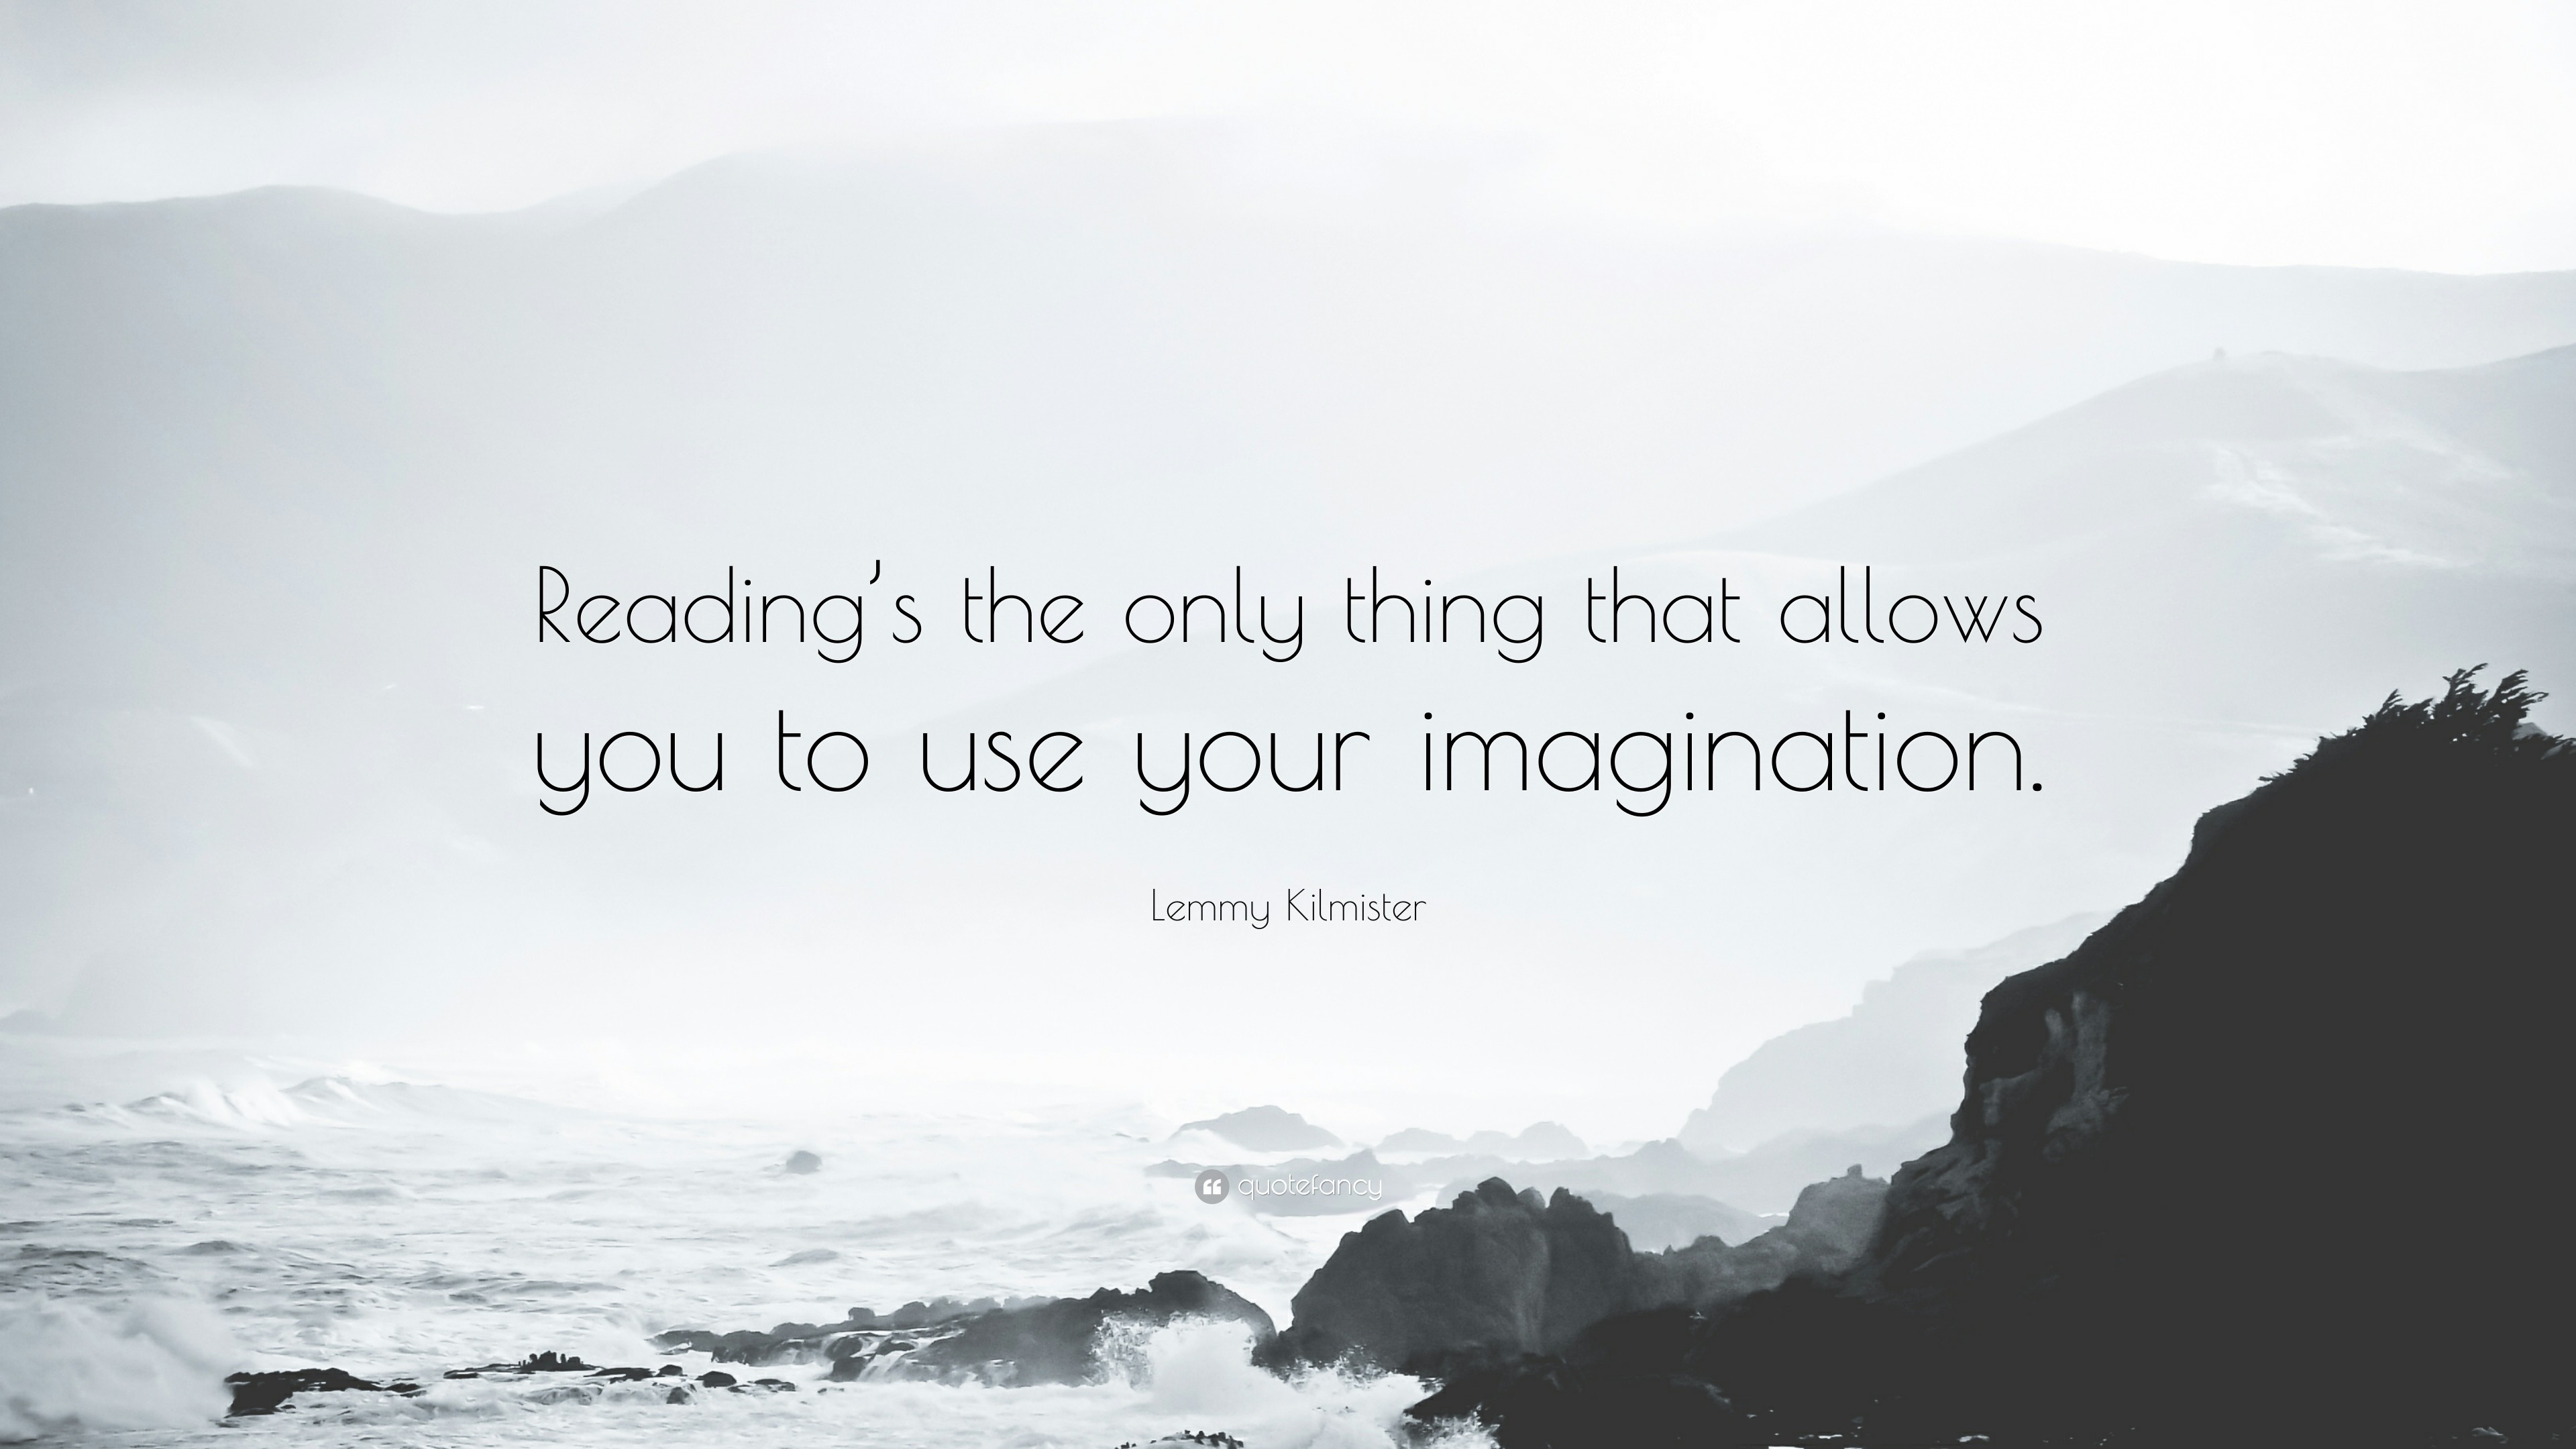 3840x2160 Lemmy Kilmister Quote: “Reading's the only thing that allows you to use  your imagination